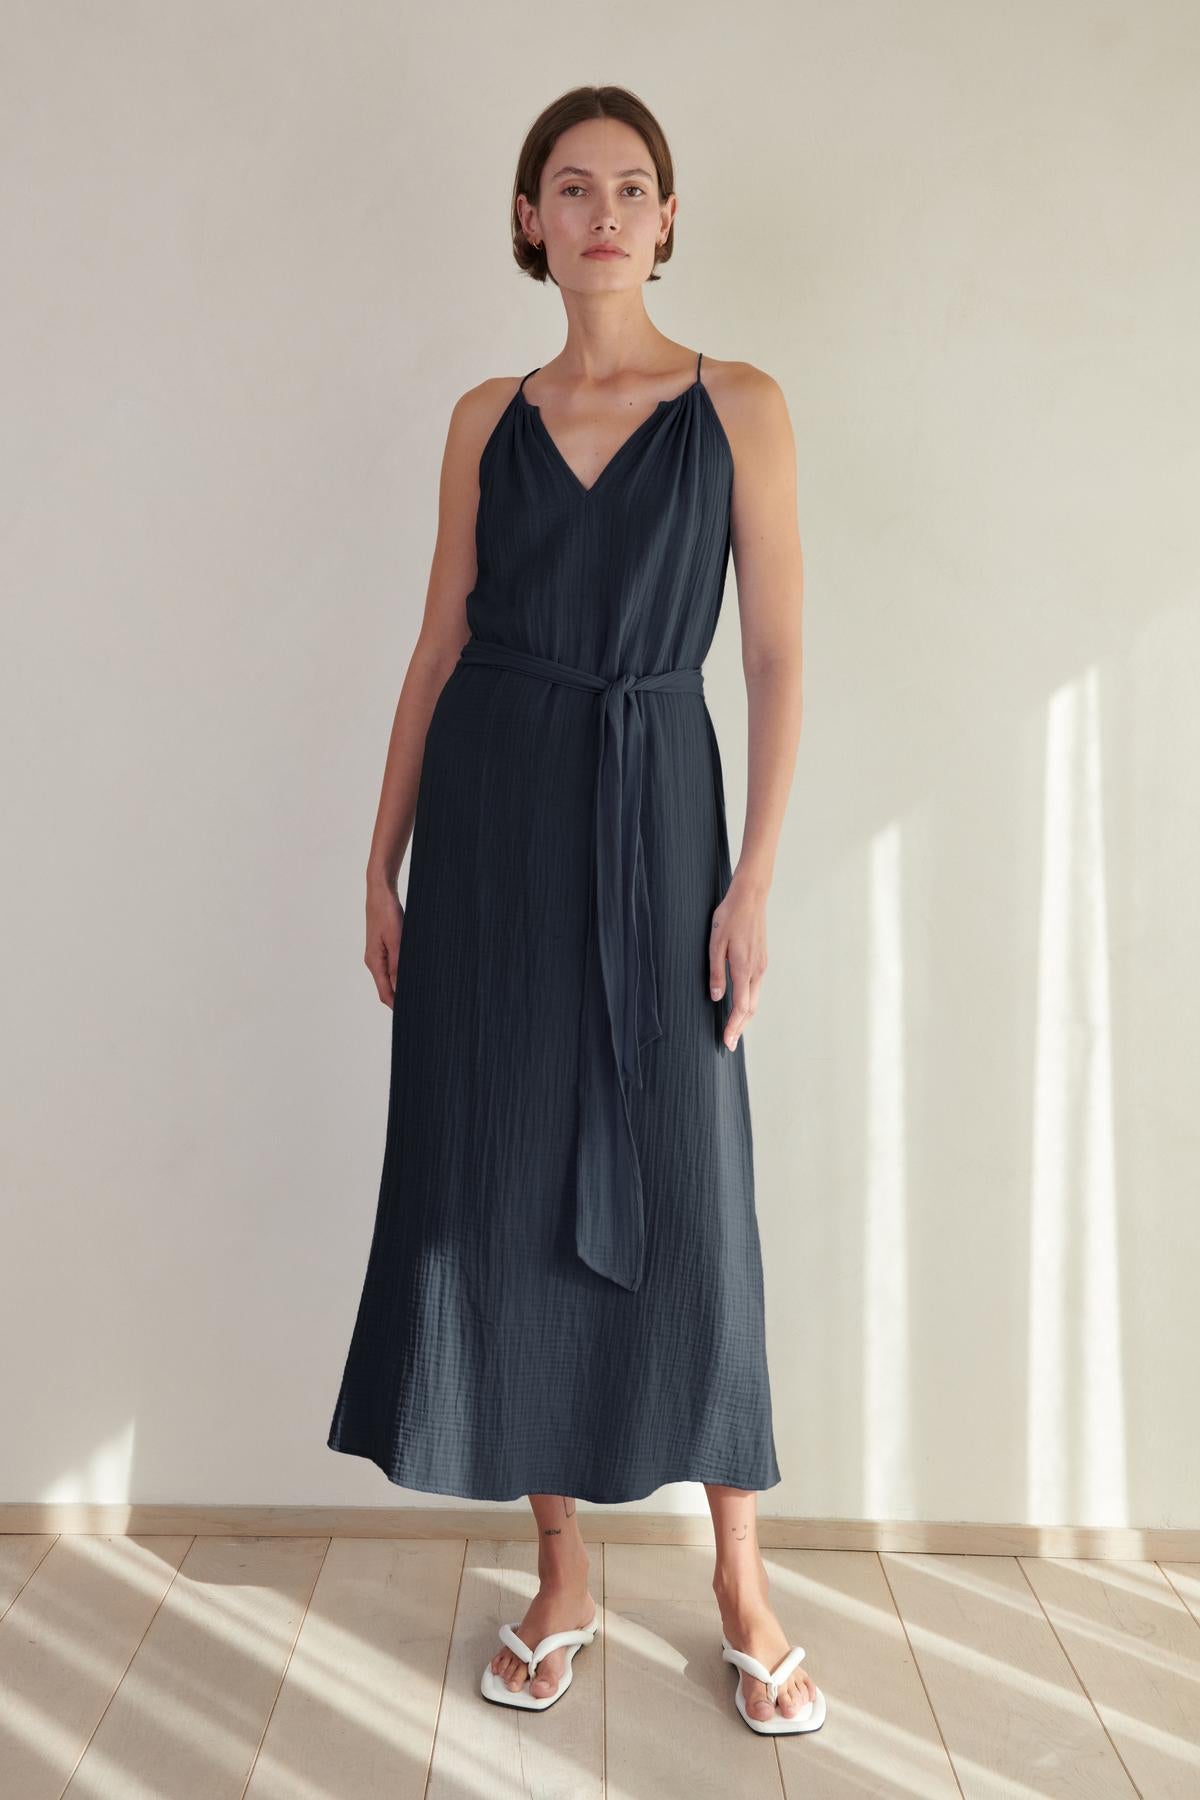 A woman in a navy blue sleeveless Carrillo dress by Velvet by Jenny Graham and white slides, standing in a softly lit room with shadows on the wall.-26293220016321